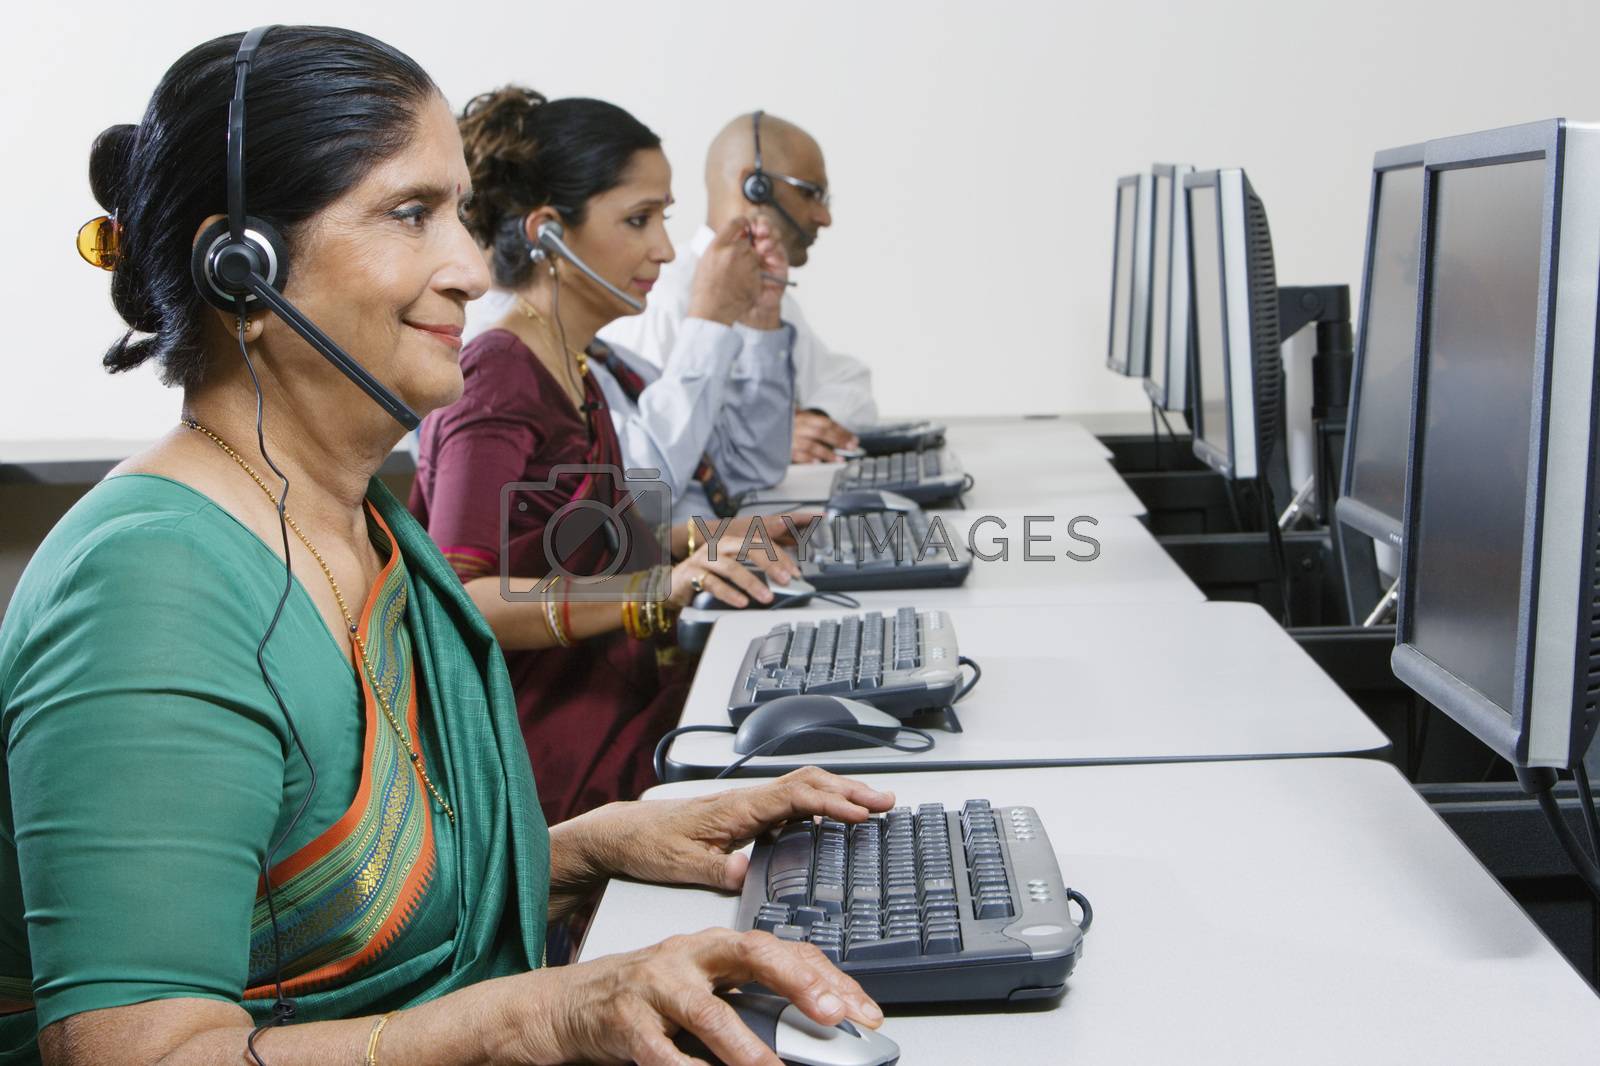 Royalty free image of Customer Service Reps in Call Center by moodboard